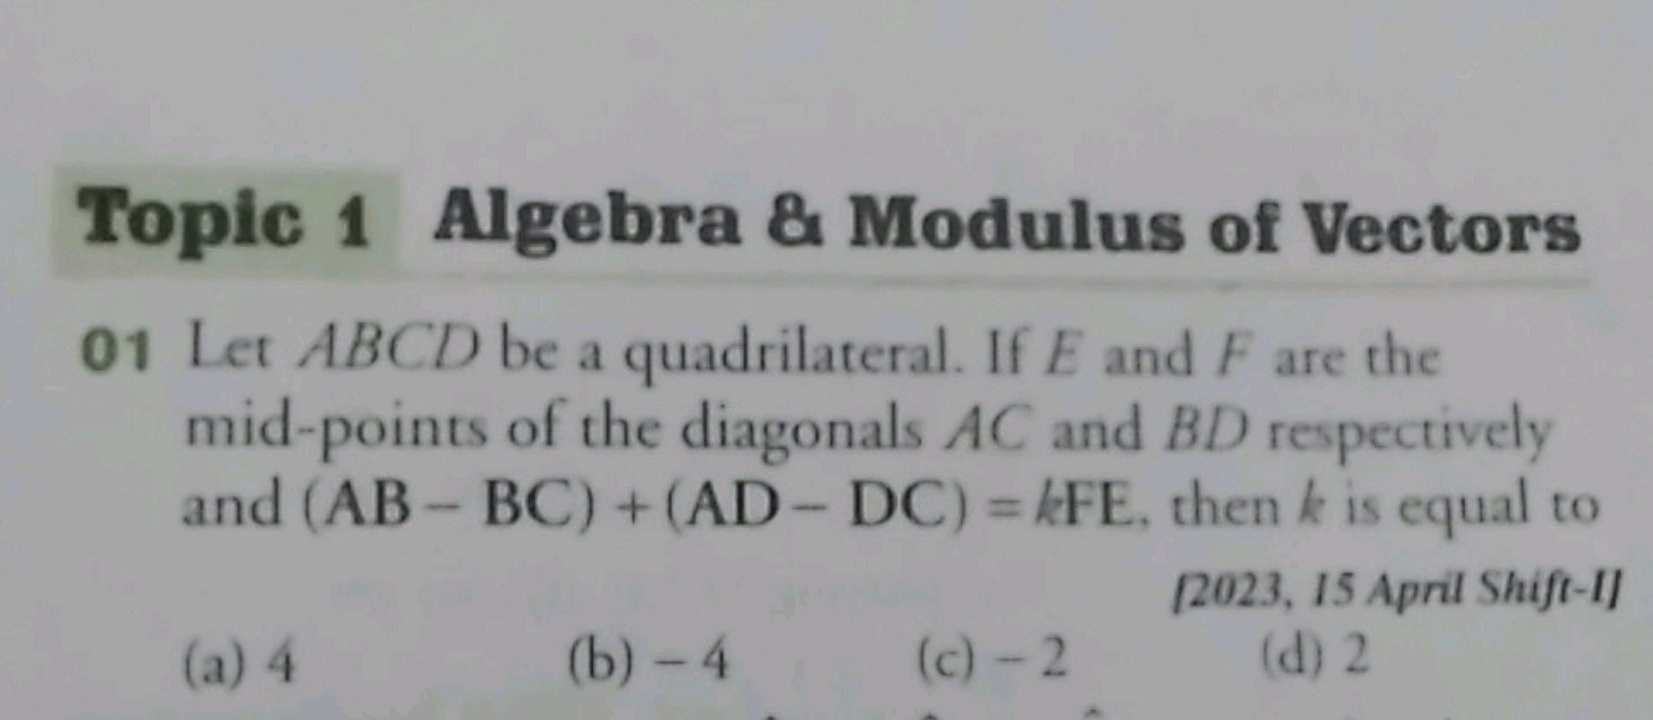 Topic 1 Algebra \& Modulus of Vectors 01 Let ABCD be a quadrilateral. 